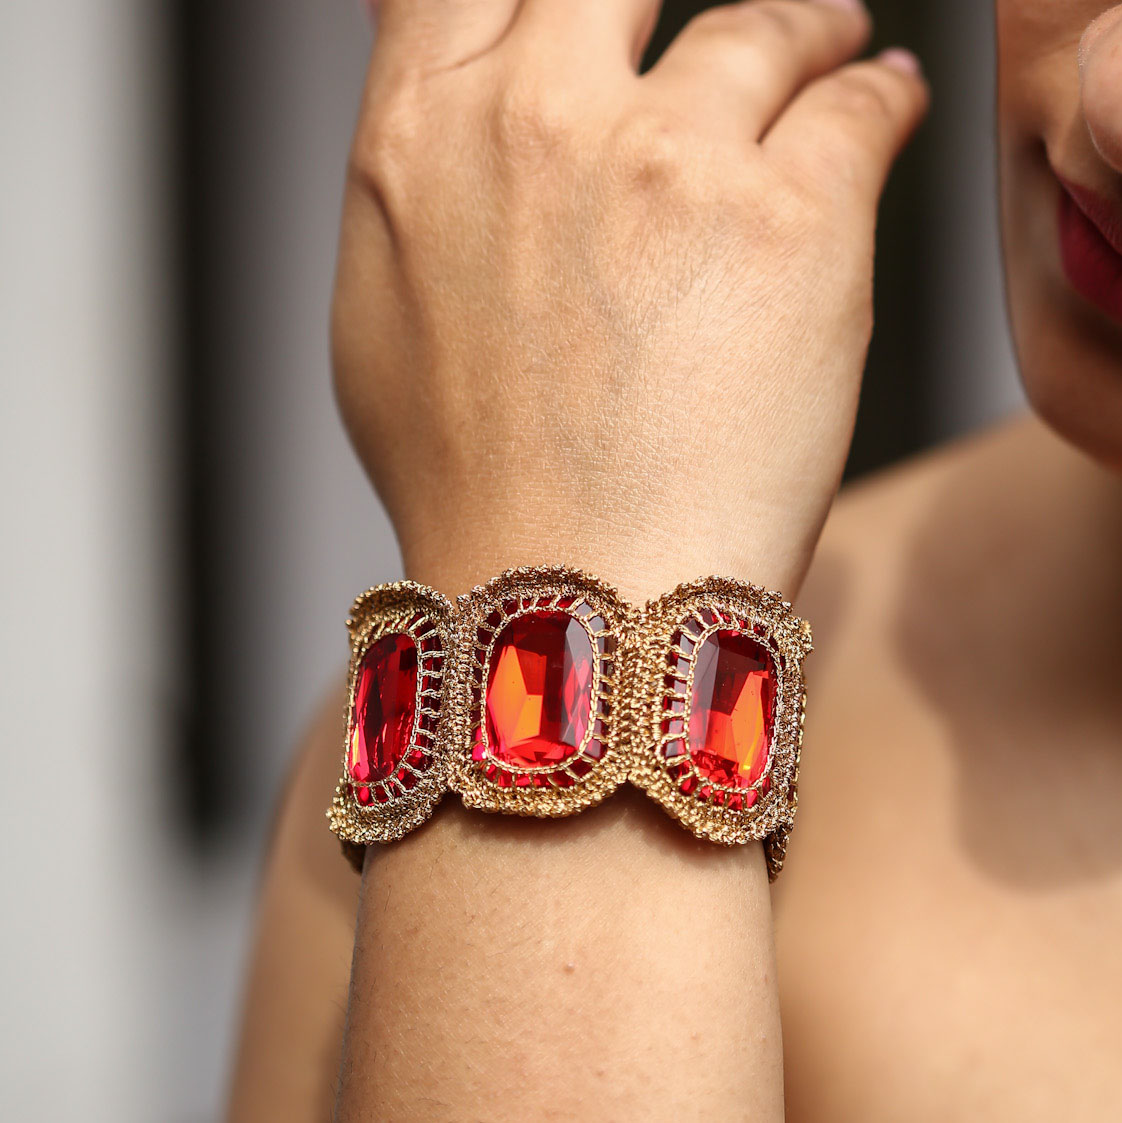 Amelia Crystal Soft Statement Bracelet in red lava colour wrapped around a model's wrist.